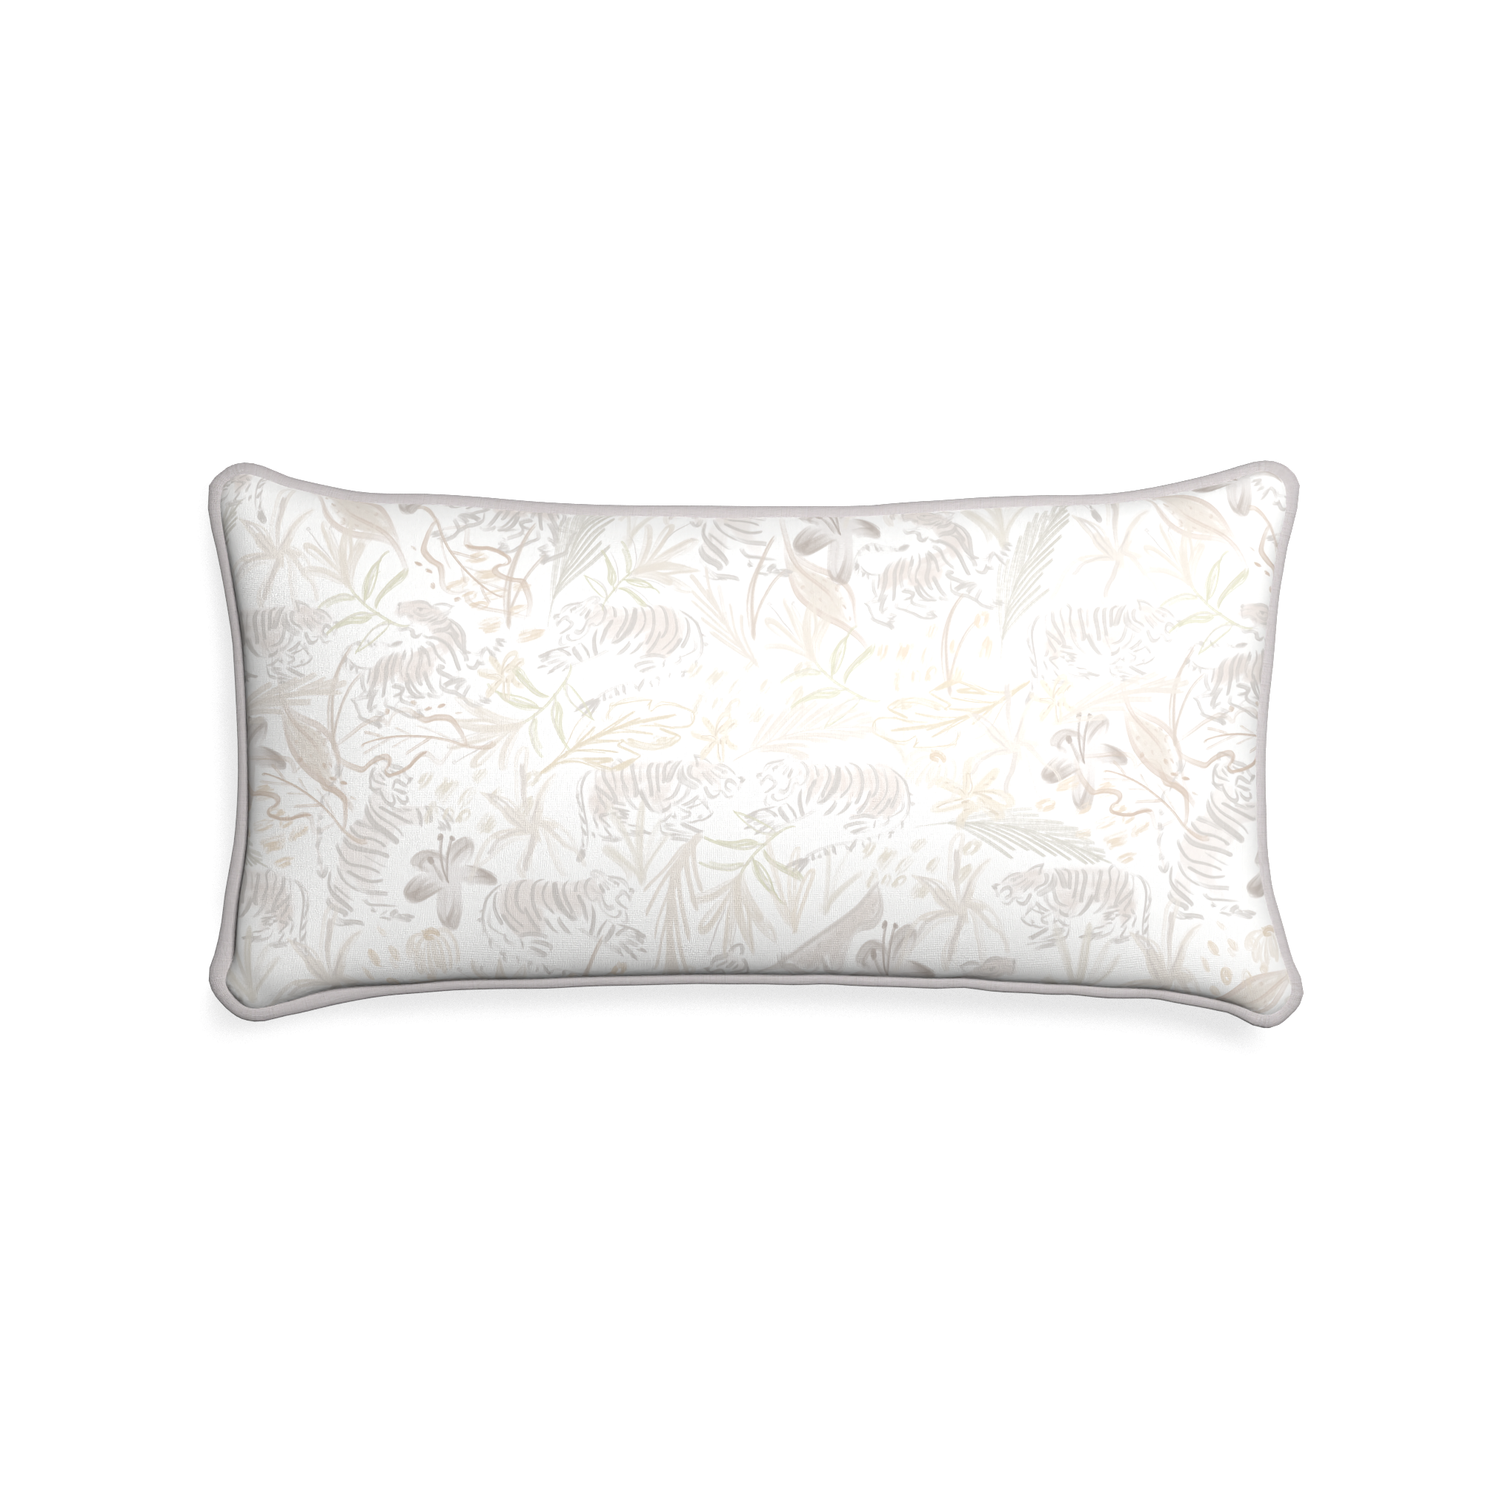 Midi-lumbar frida sand custom beige chinoiserie tigerpillow with pebble piping on white background